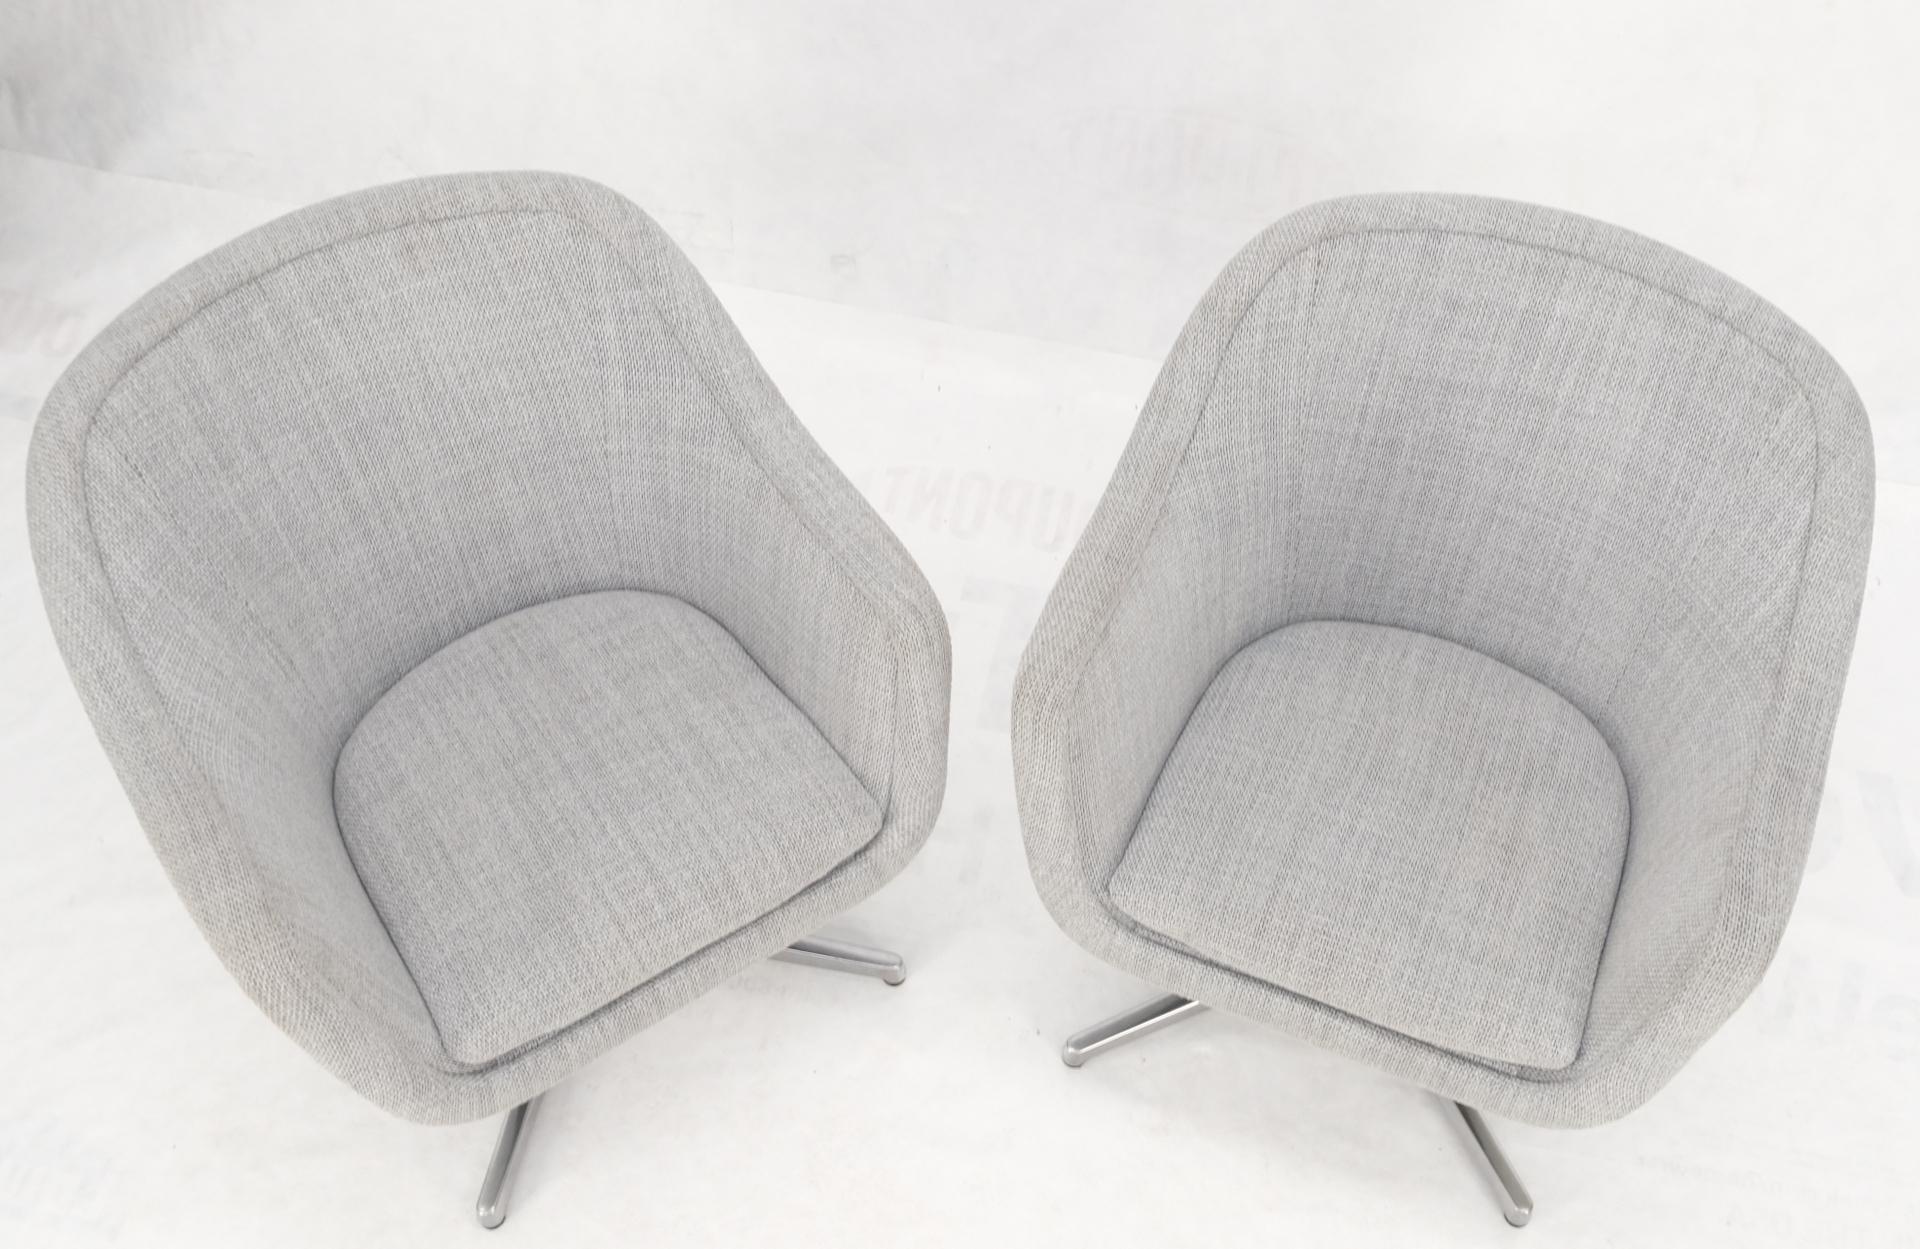 American Pair of Light Grey Basket Weave Upholstery Barrel Back Desk Office Chairs 